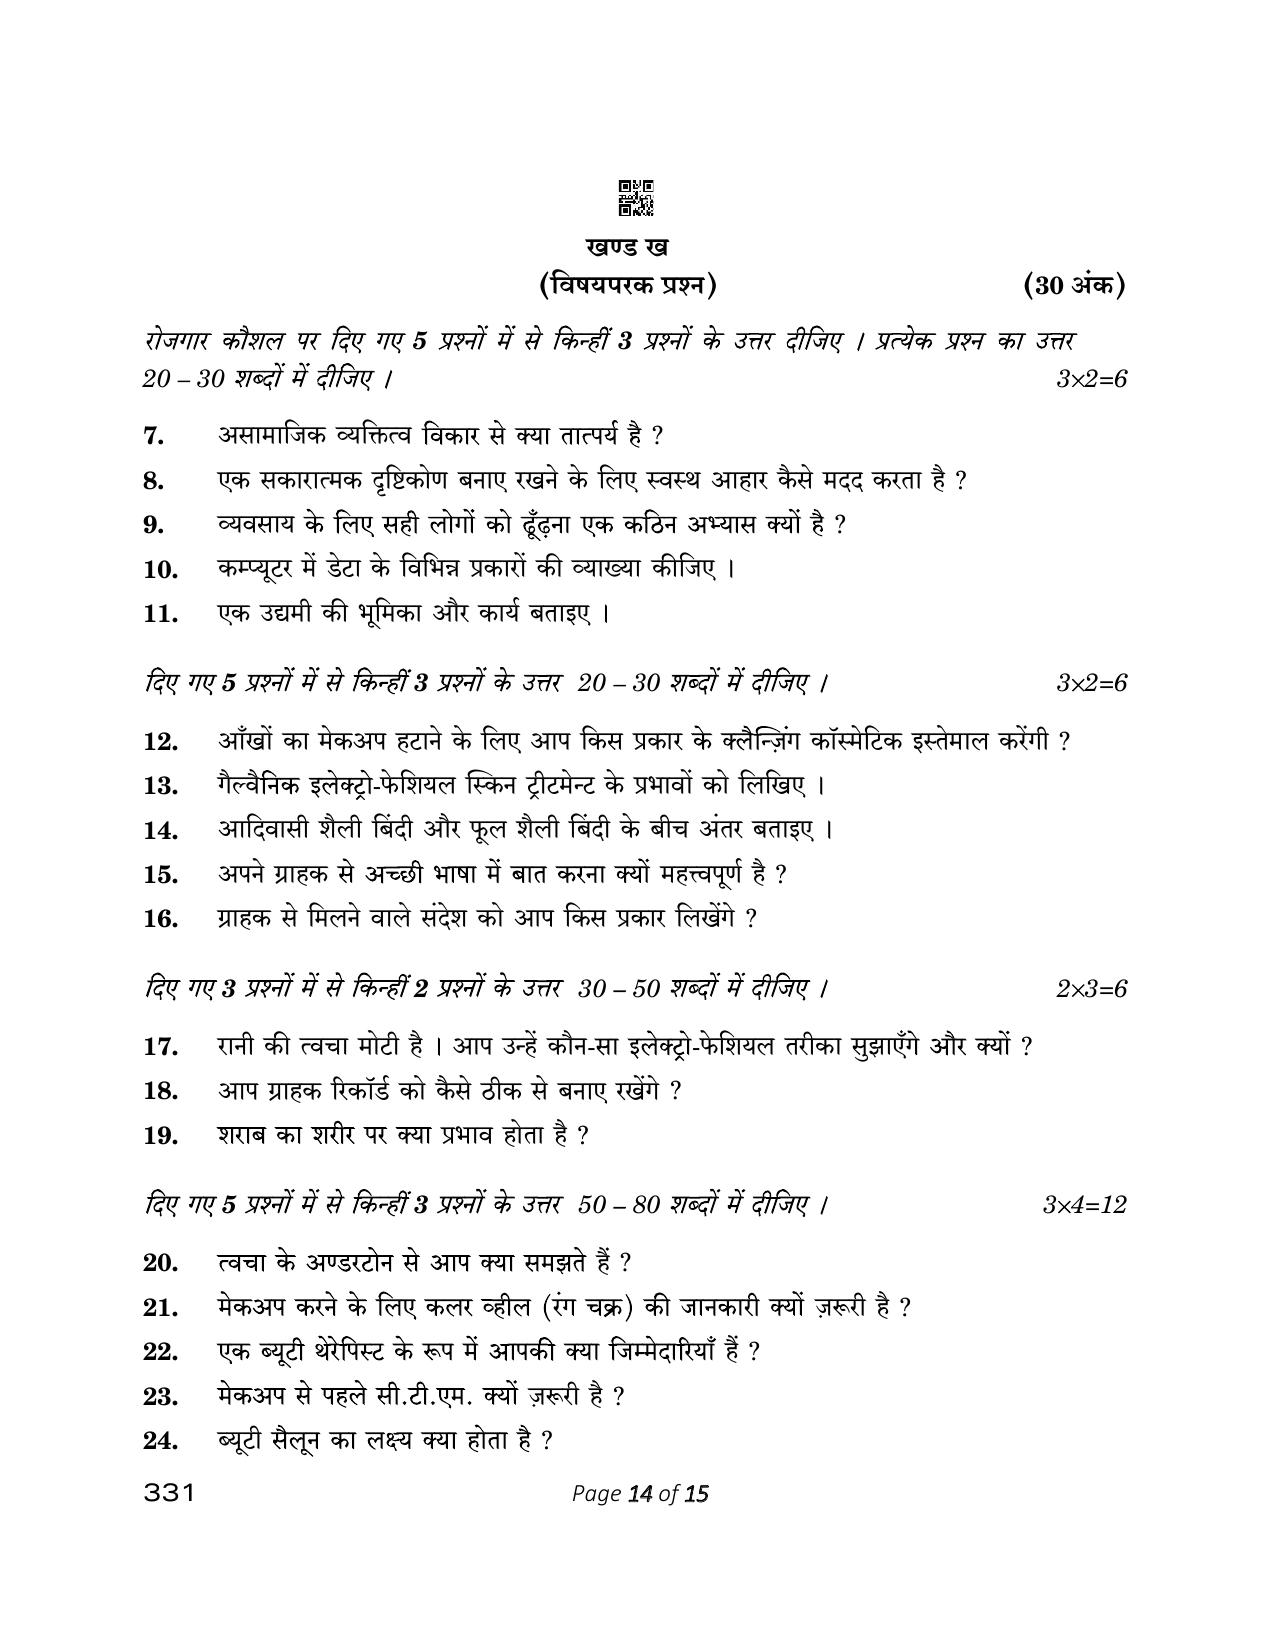 CBSE Class 12 331 Beauty And Wellness 2023 Question Paper - Page 14